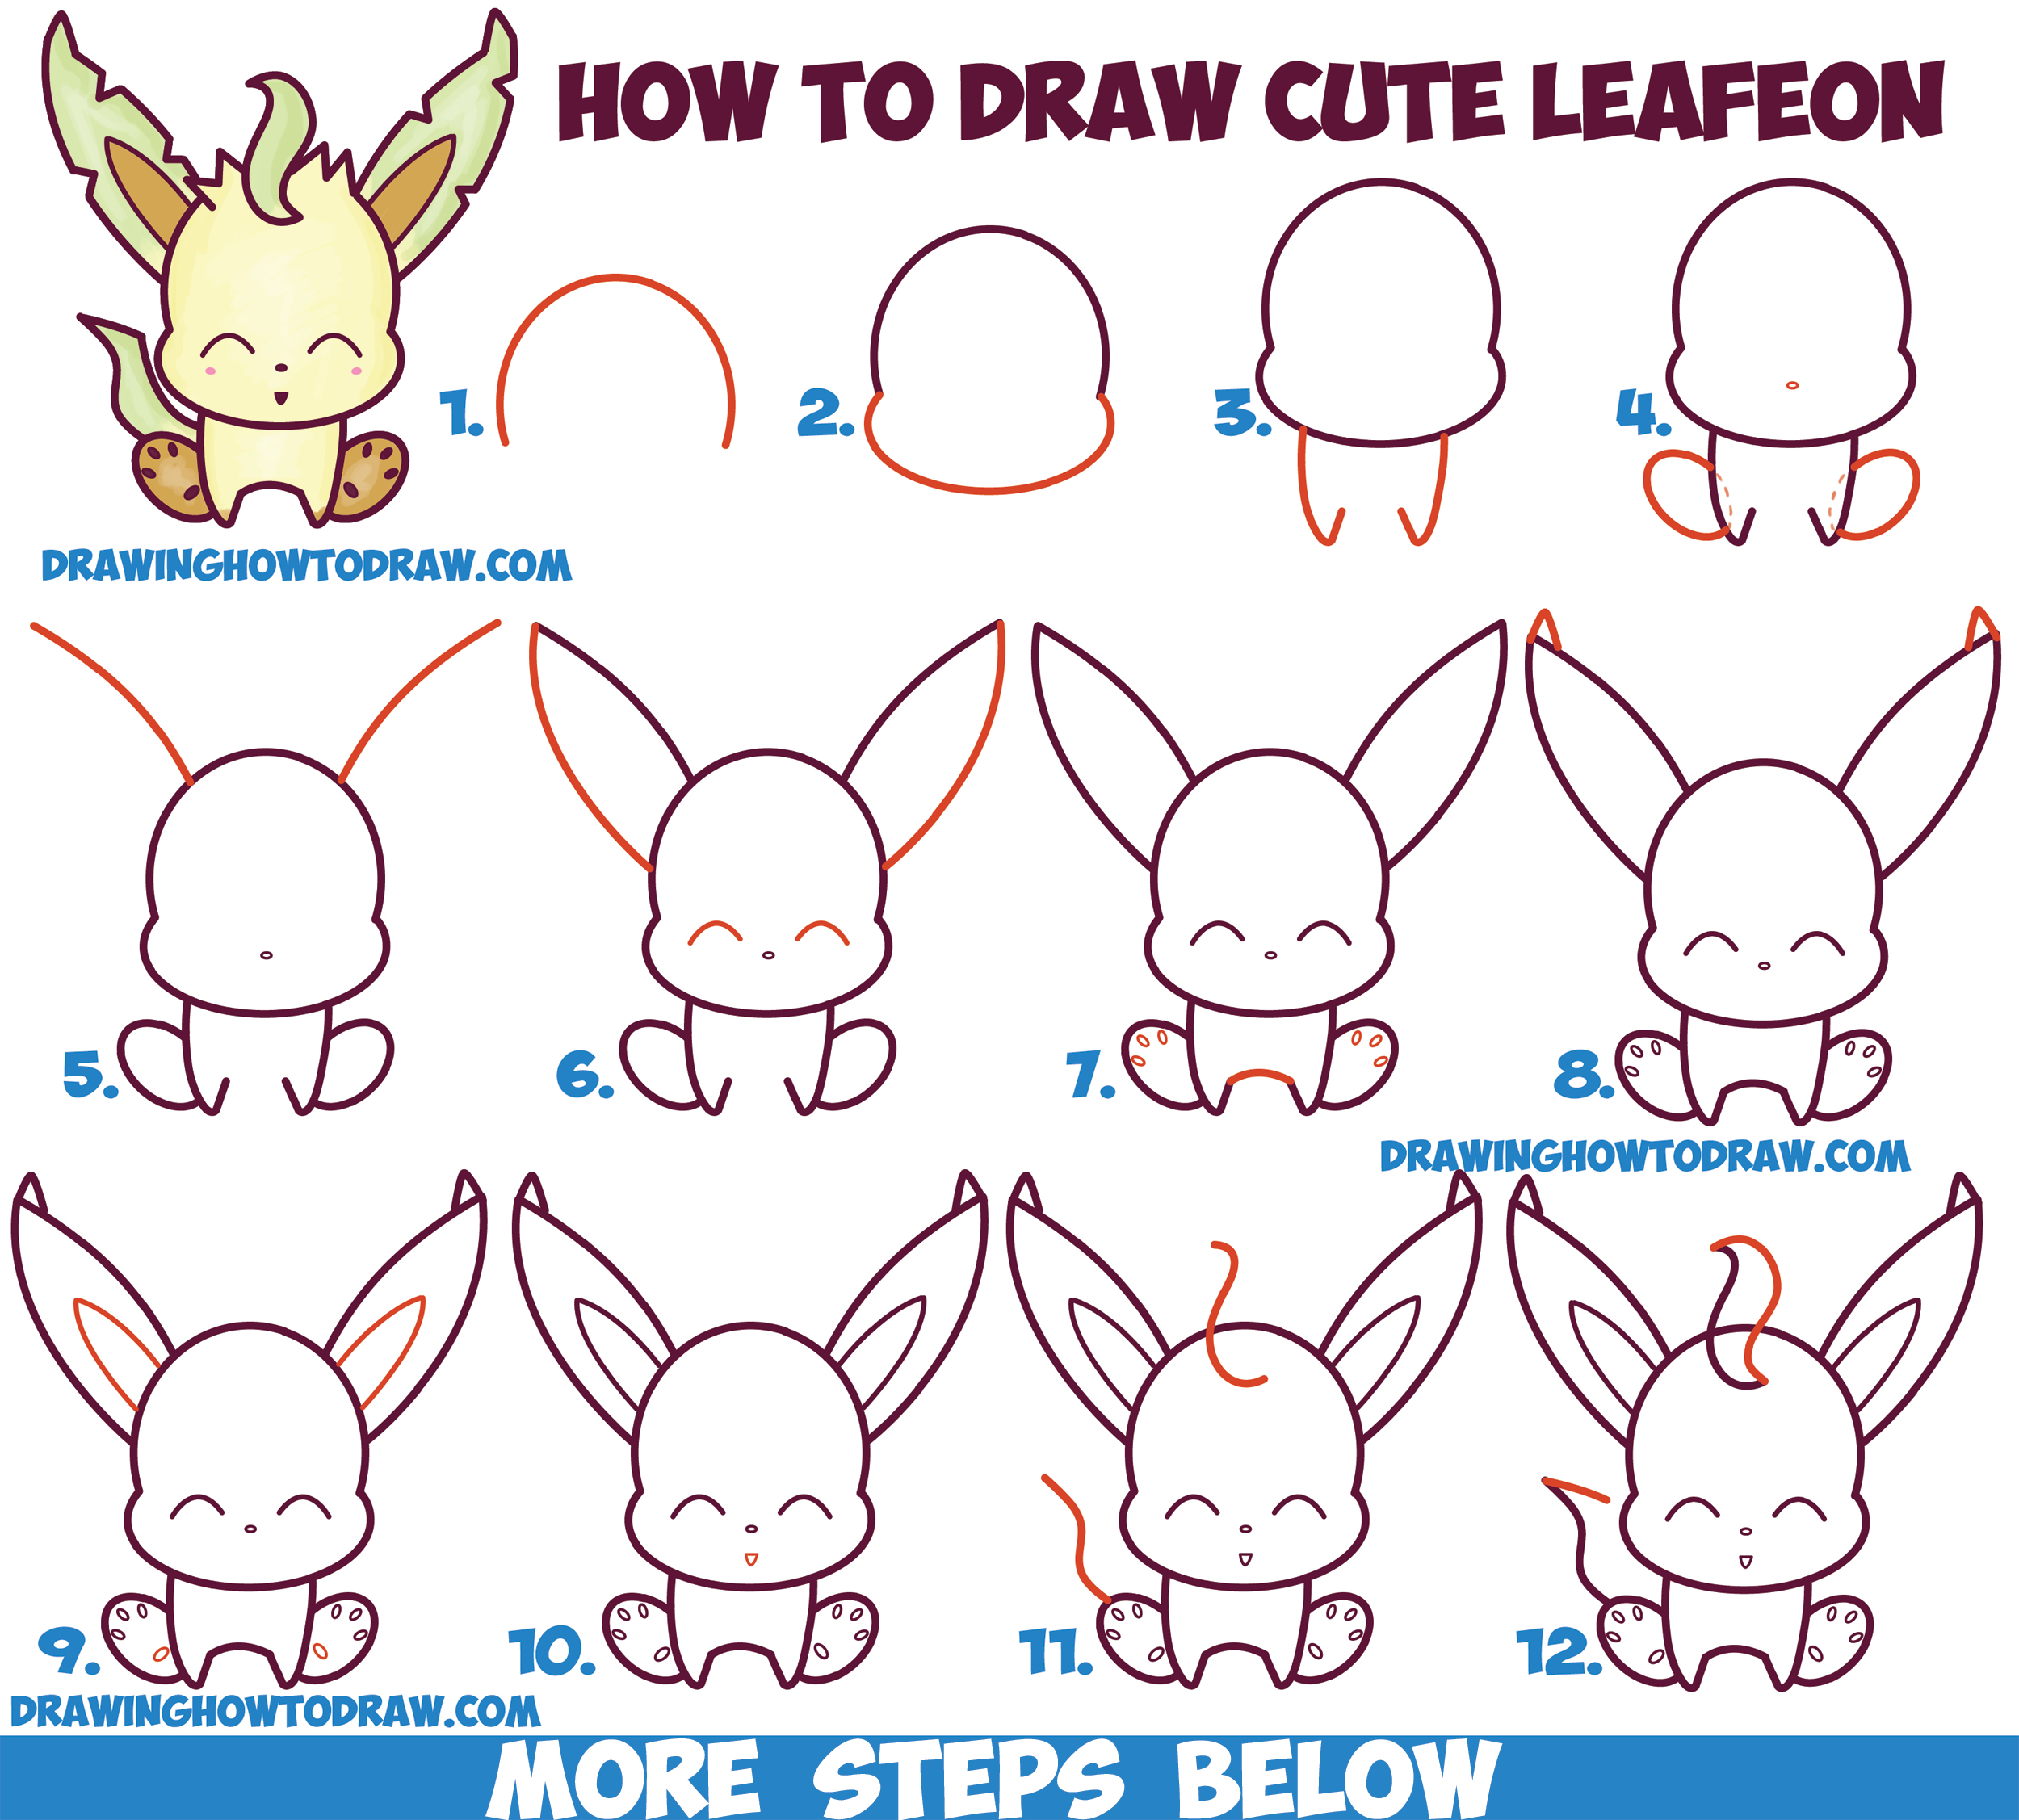 How to Draw Cute Kawaii Chibi Leafeon from Pokemon Easy Step by Step